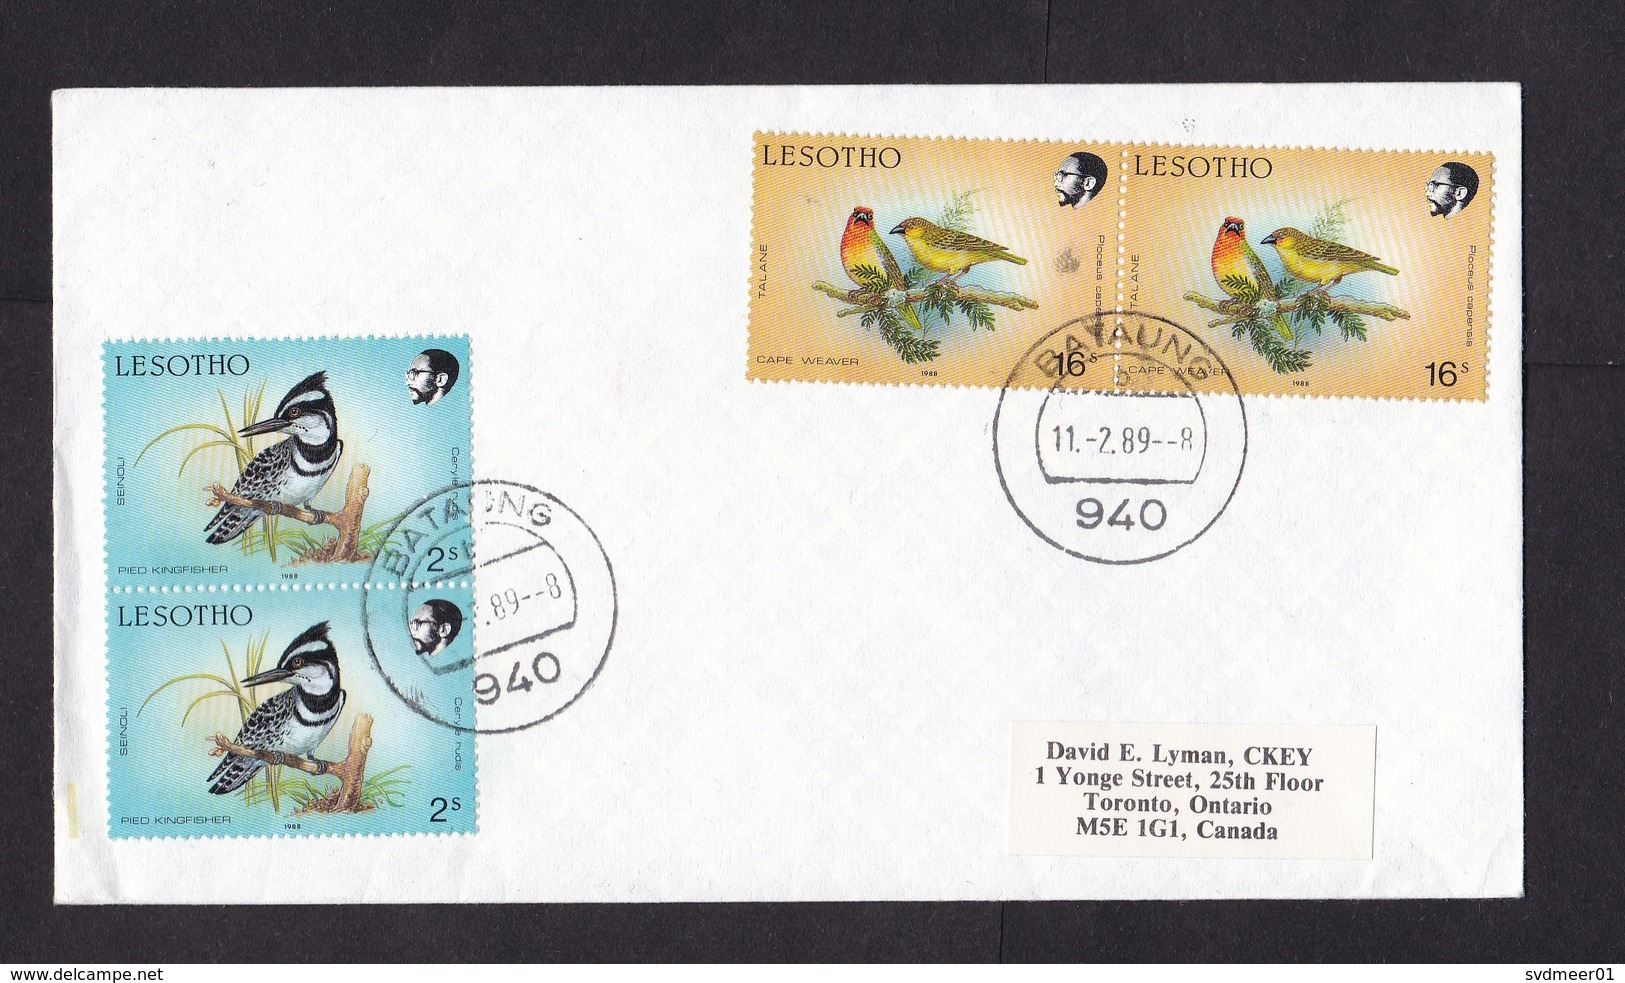 Lesotho: Cover To Canada, 1989, 4 Stamps, Bird, Kingfisher, Cancel Bataung, Rare Real Use (writing At Back) - Lesotho (1966-...)